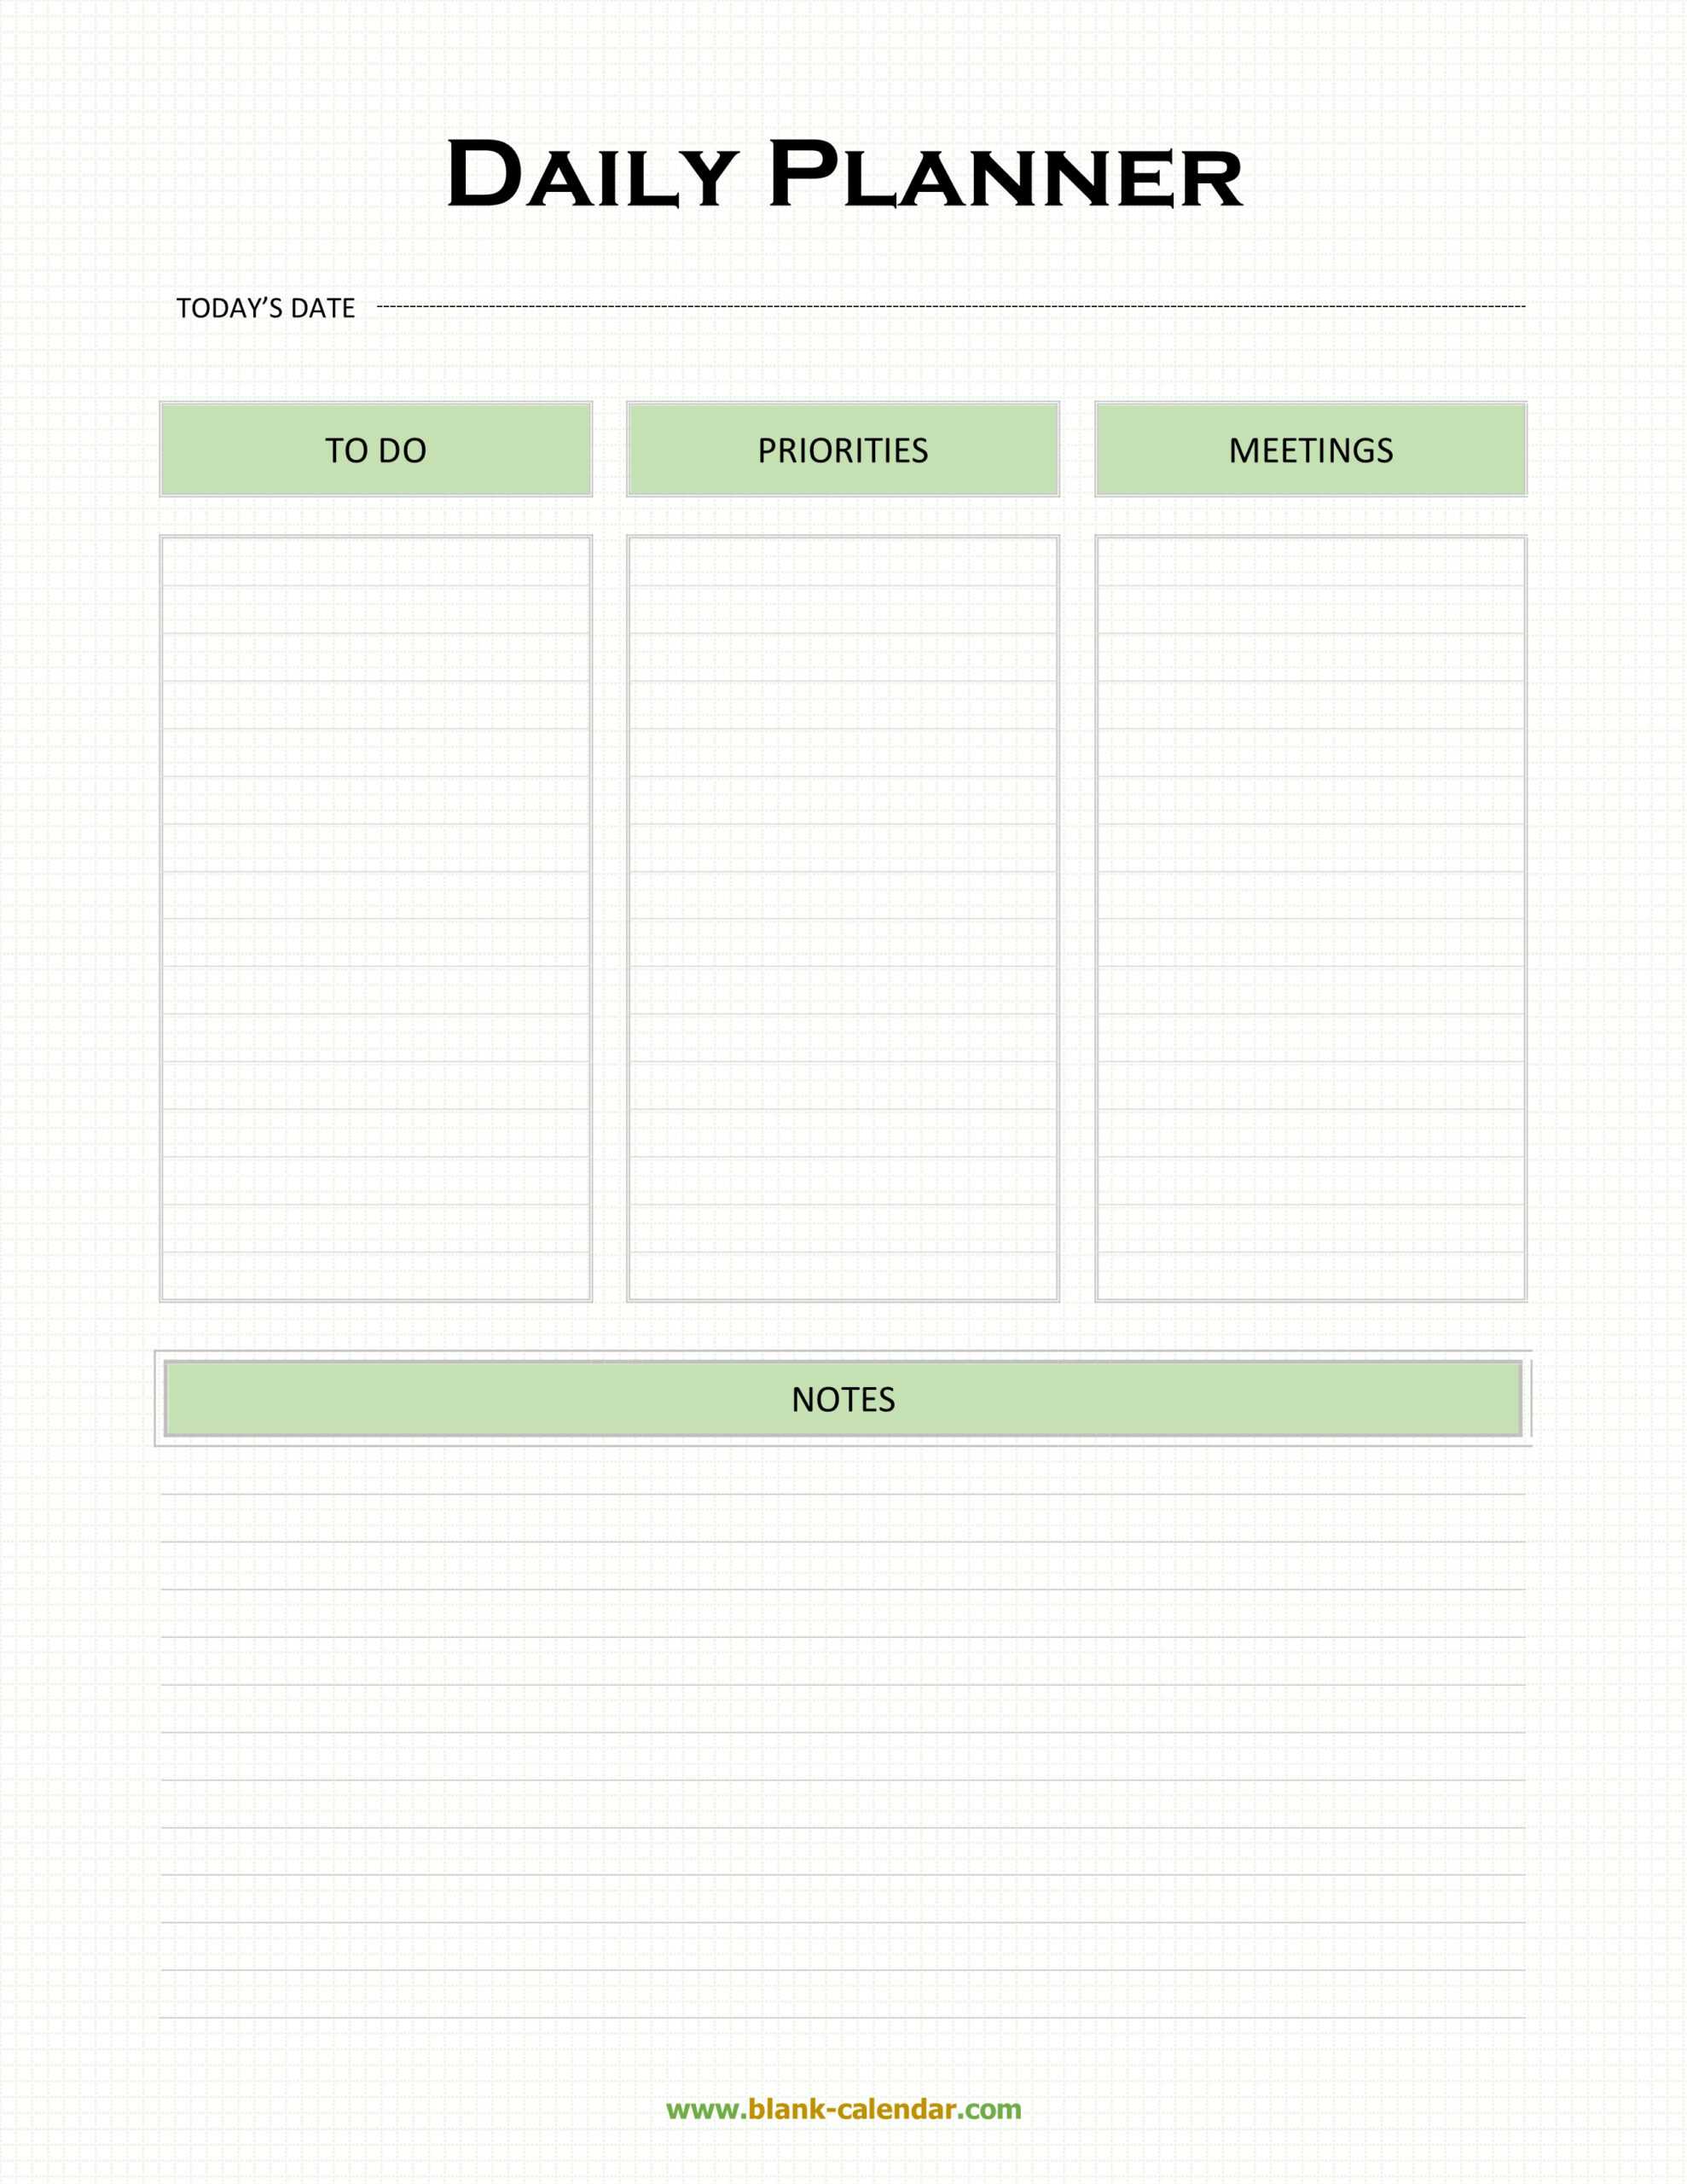 Daily Planner Templates (Word, Excel, Pdf) Regarding Printable Blank Daily Schedule Template